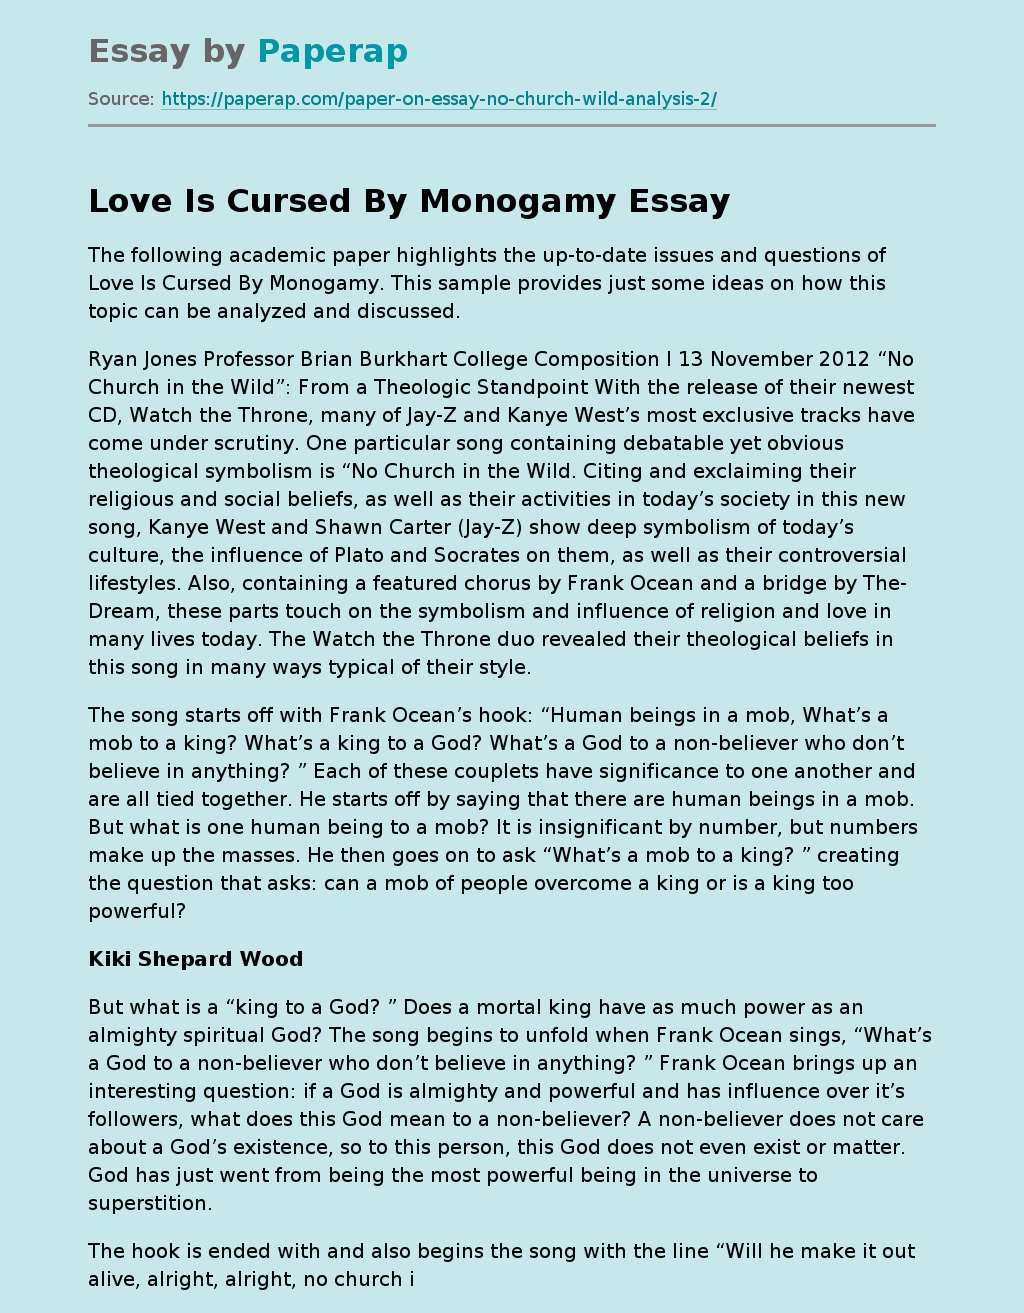 Love Is Cursed By Monogamy